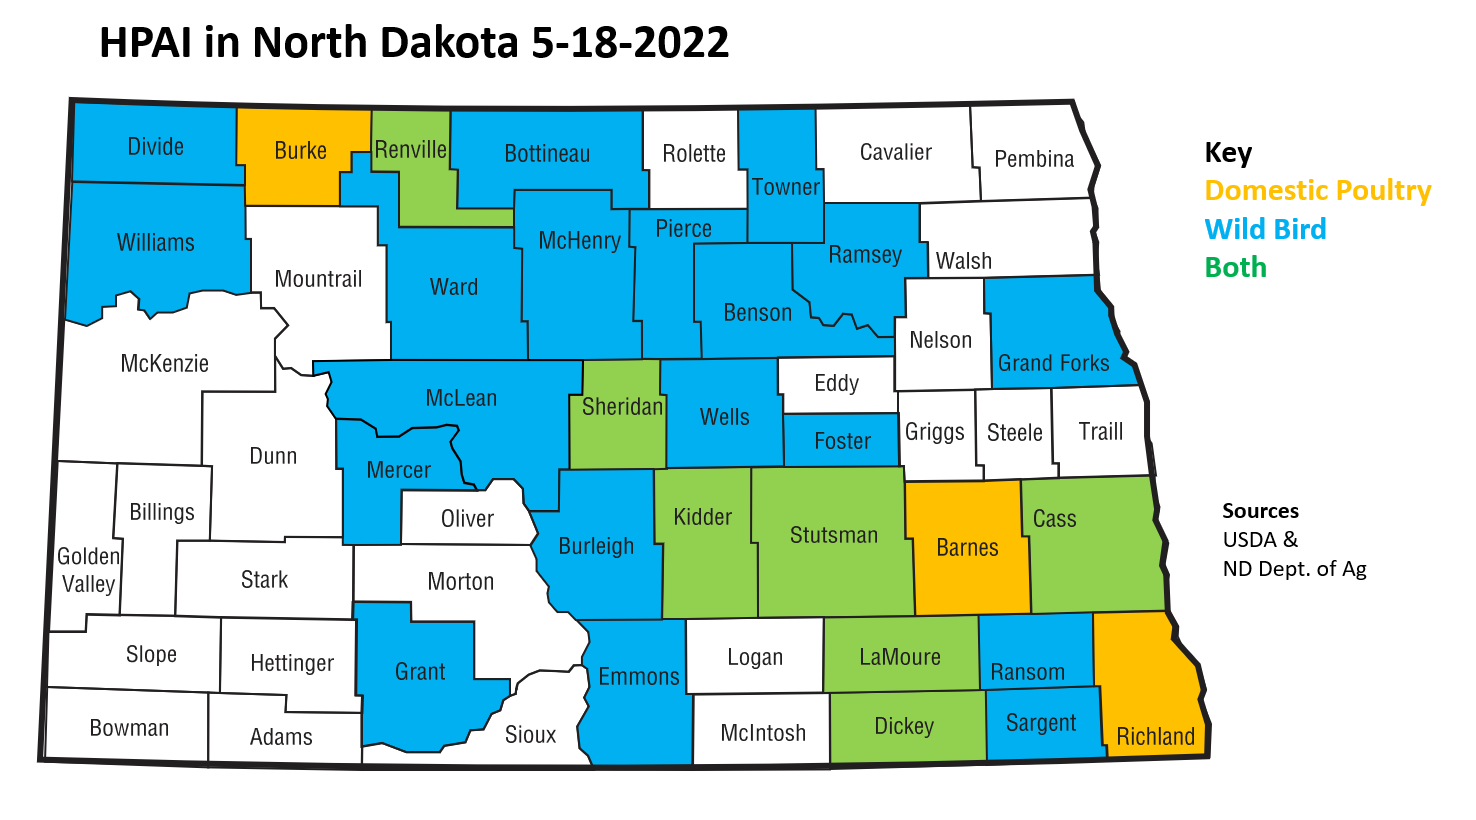 Map of ND Counties with HPAI as of 5-18-22; see caption for details